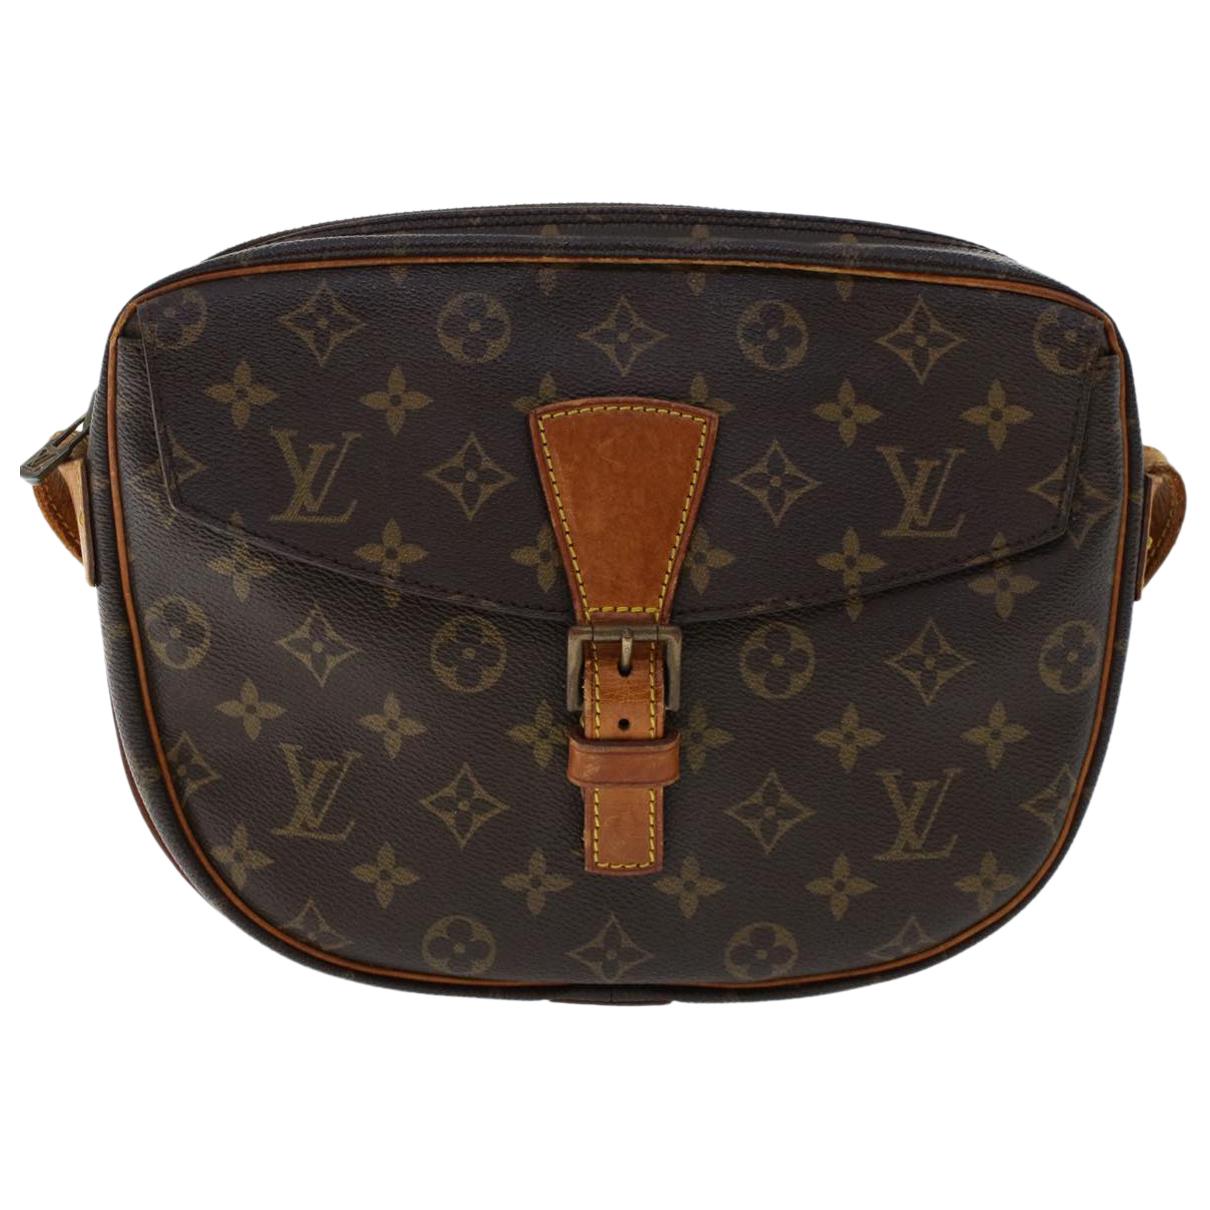 Félicie leather crossbody bag Louis Vuitton Brown in Leather